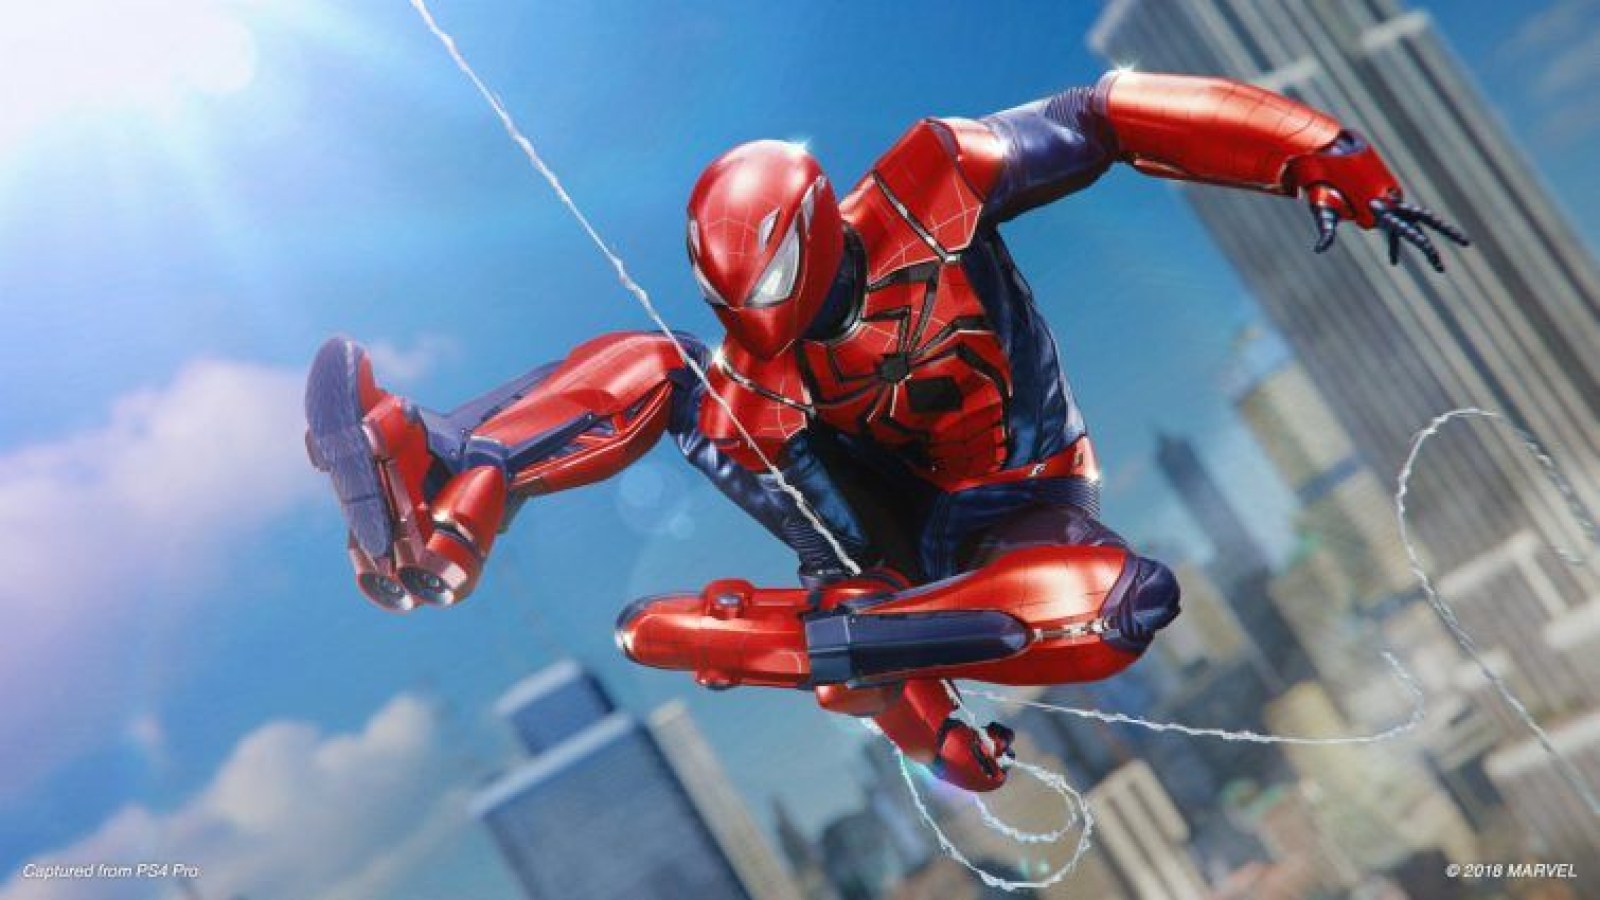 Marvel's Spider-Man' Silver Lining Suits: How to Unlock New Equipment